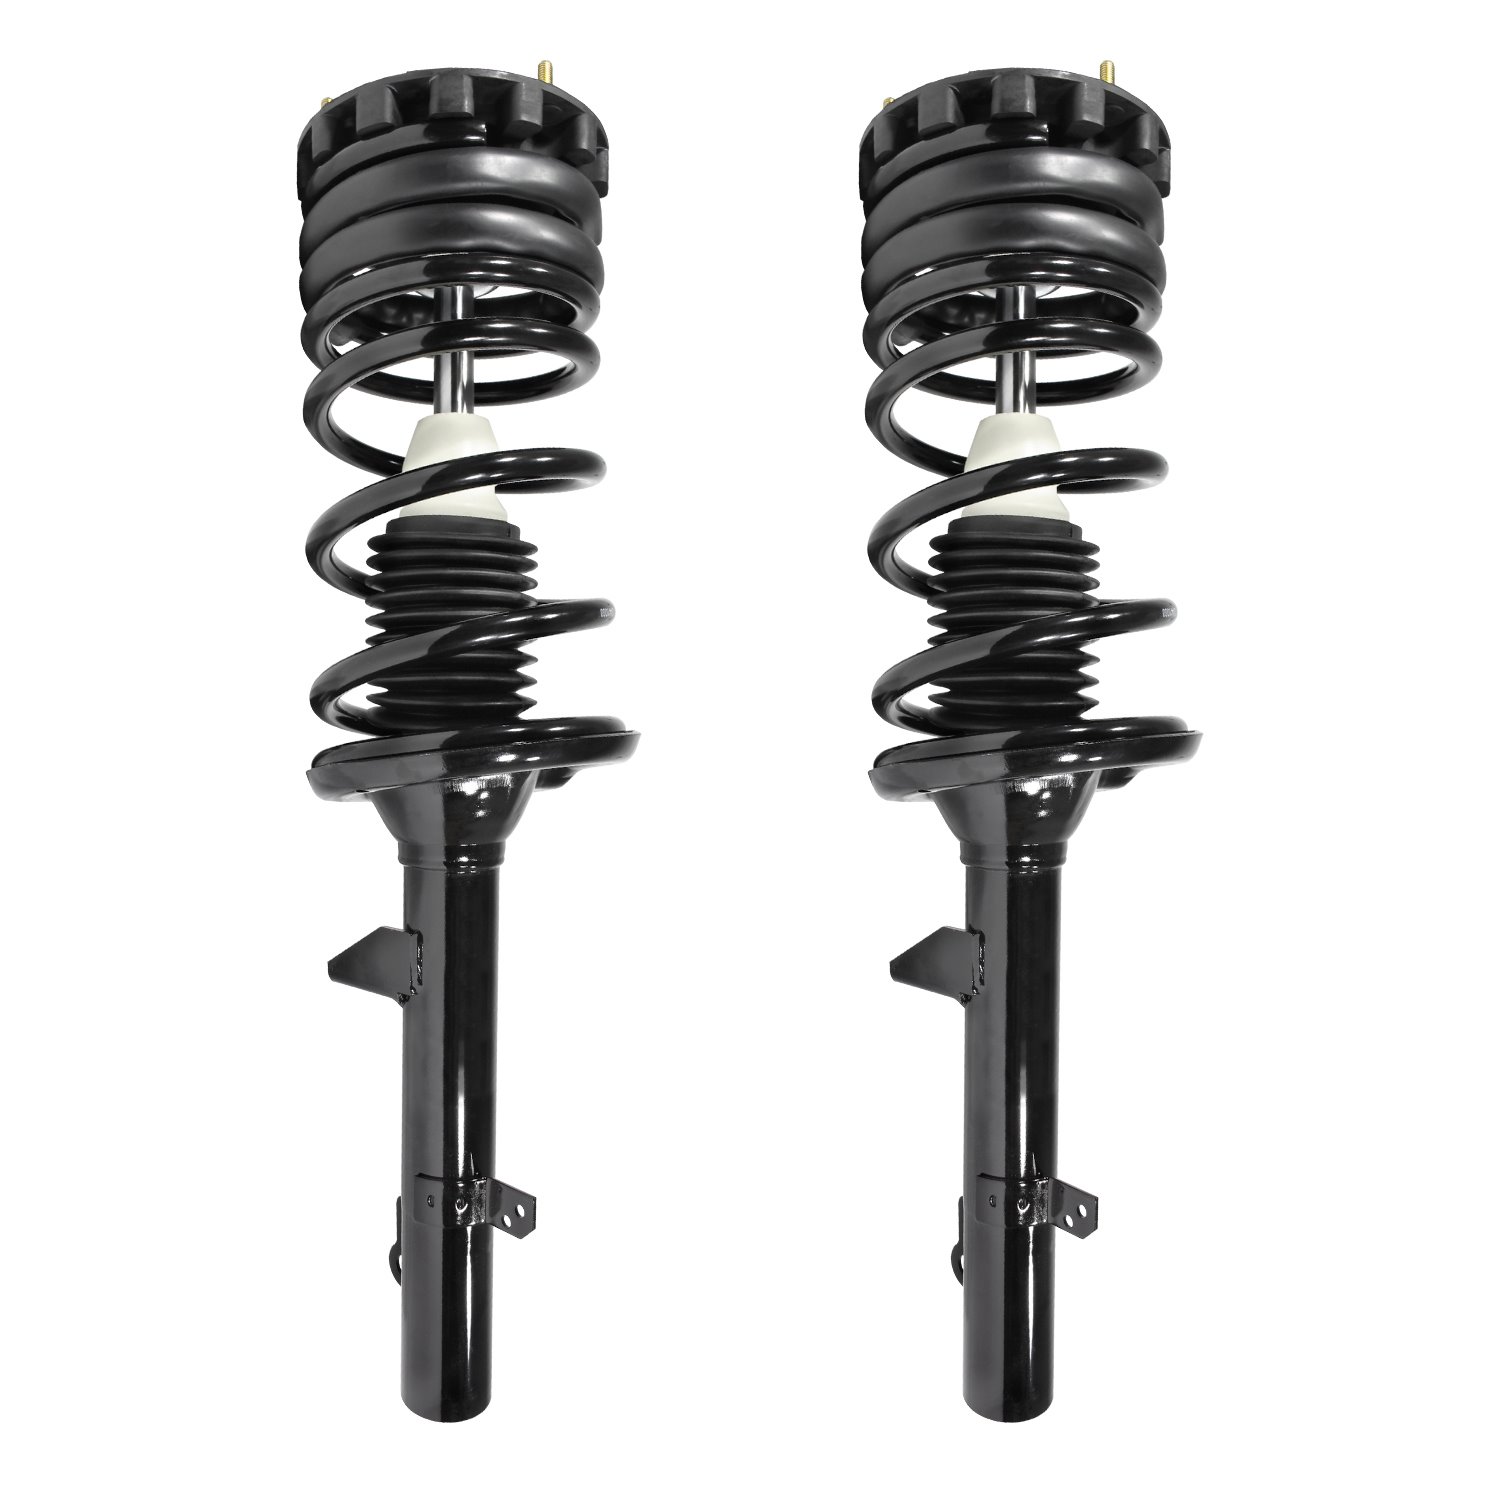 2-15040-001 Suspension Strut & Coil Spring Assembly Set Fits Select Ford Taurus, Mercury Sable